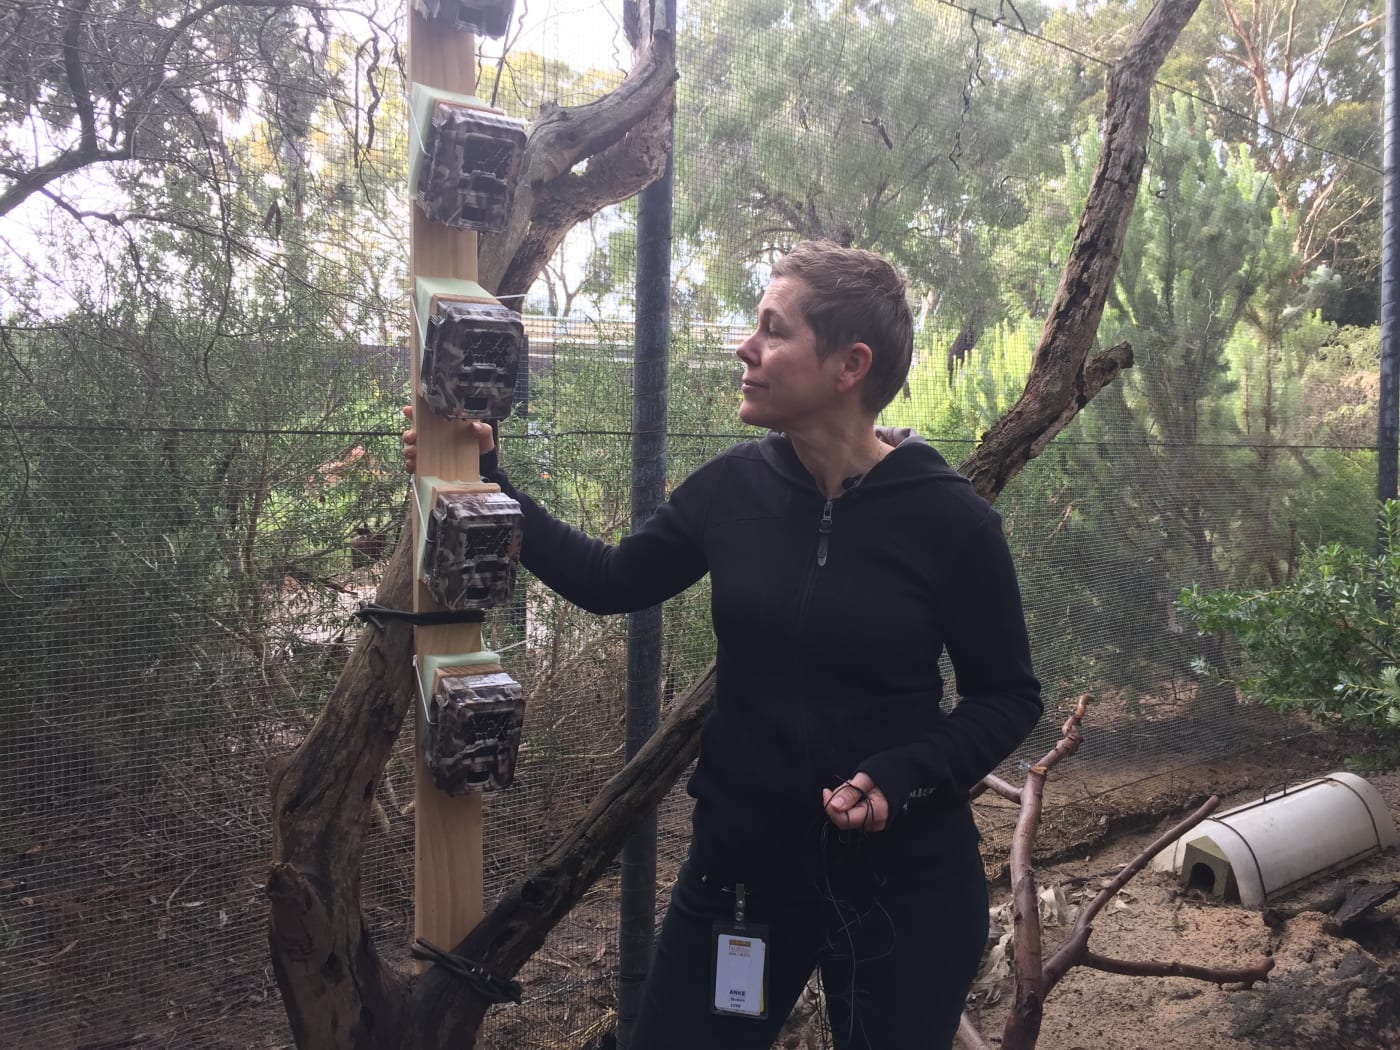 Anke Seidlitz testing remote sensor cameras at Perth Zoo, Western Australia, July 2017.
Anke is a PhD student, working with WWF-Australia and the WA Department of Biodiversity, Conservation and Attractions (DBCA) to learn more about the distribution and abundance of numbats in the Upper Warren region.